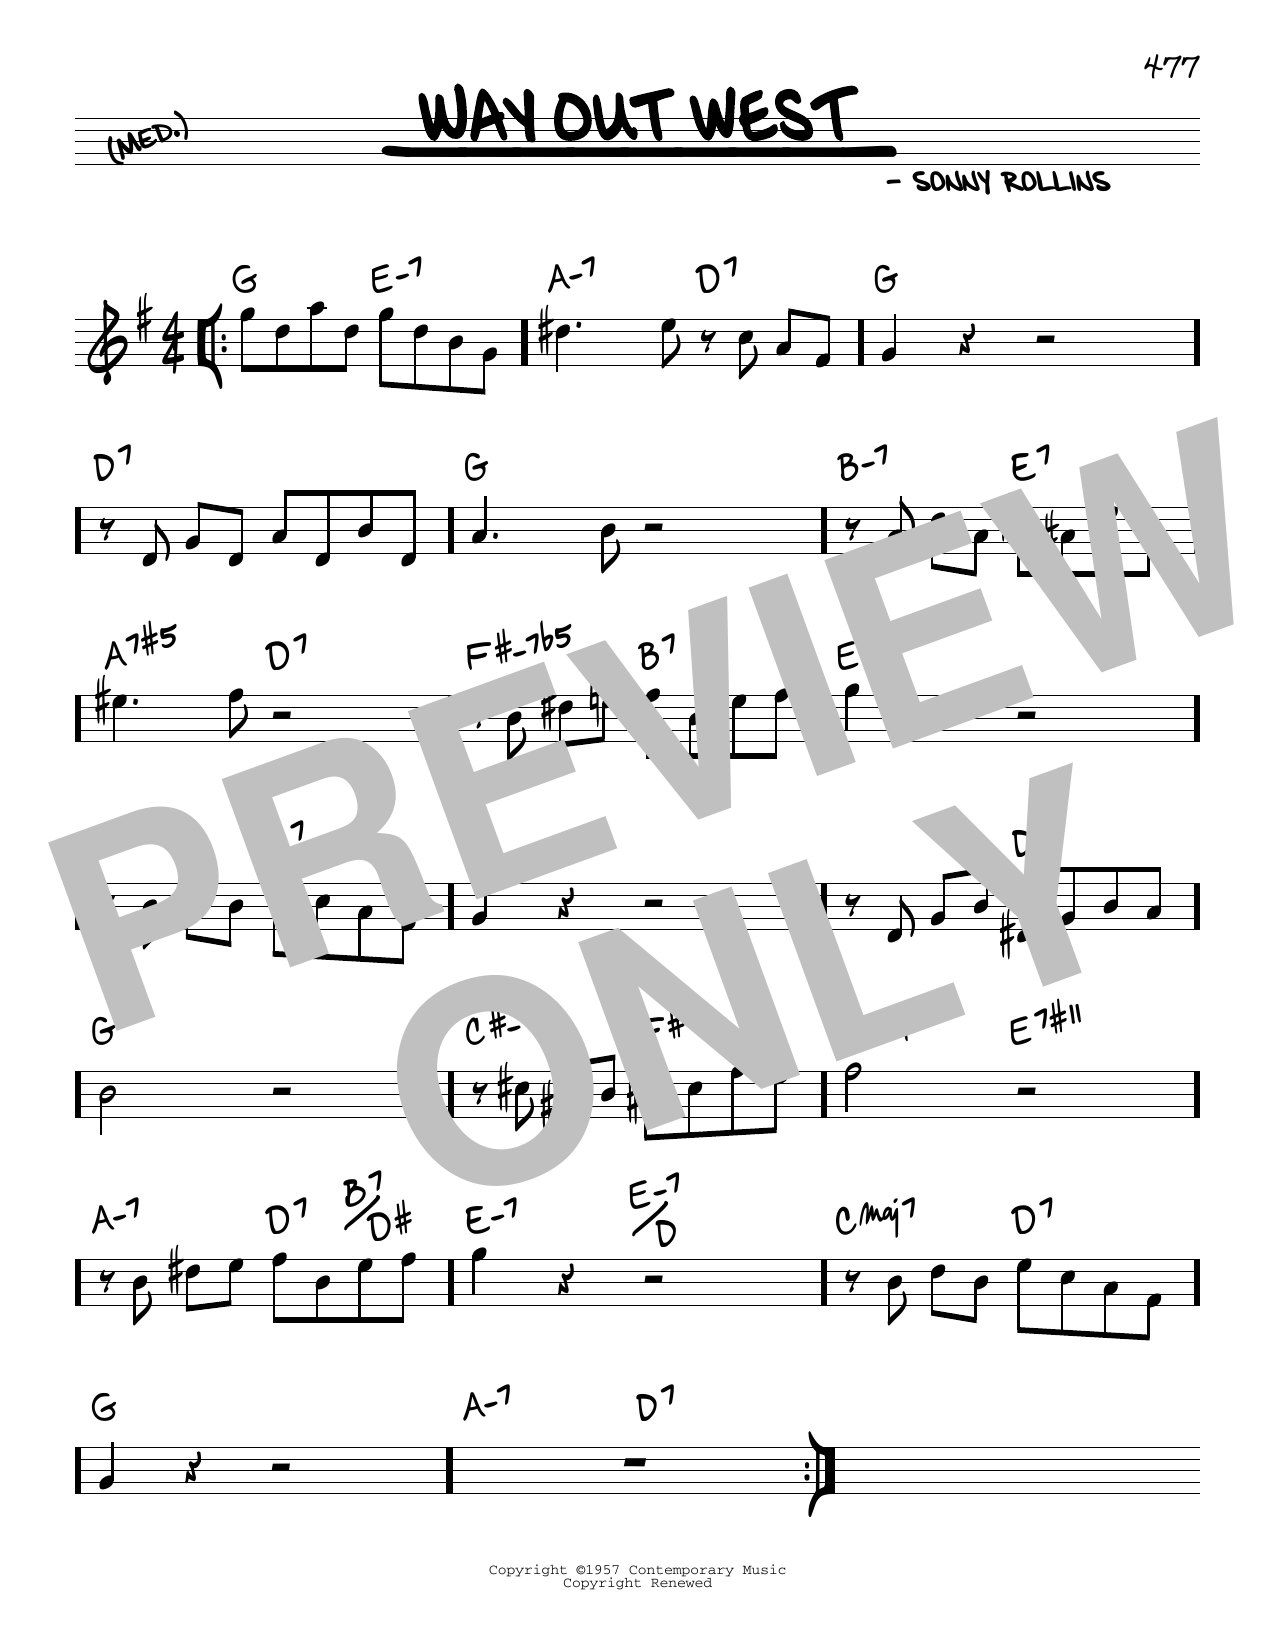 Download Sonny Rollins Way Out West Sheet Music